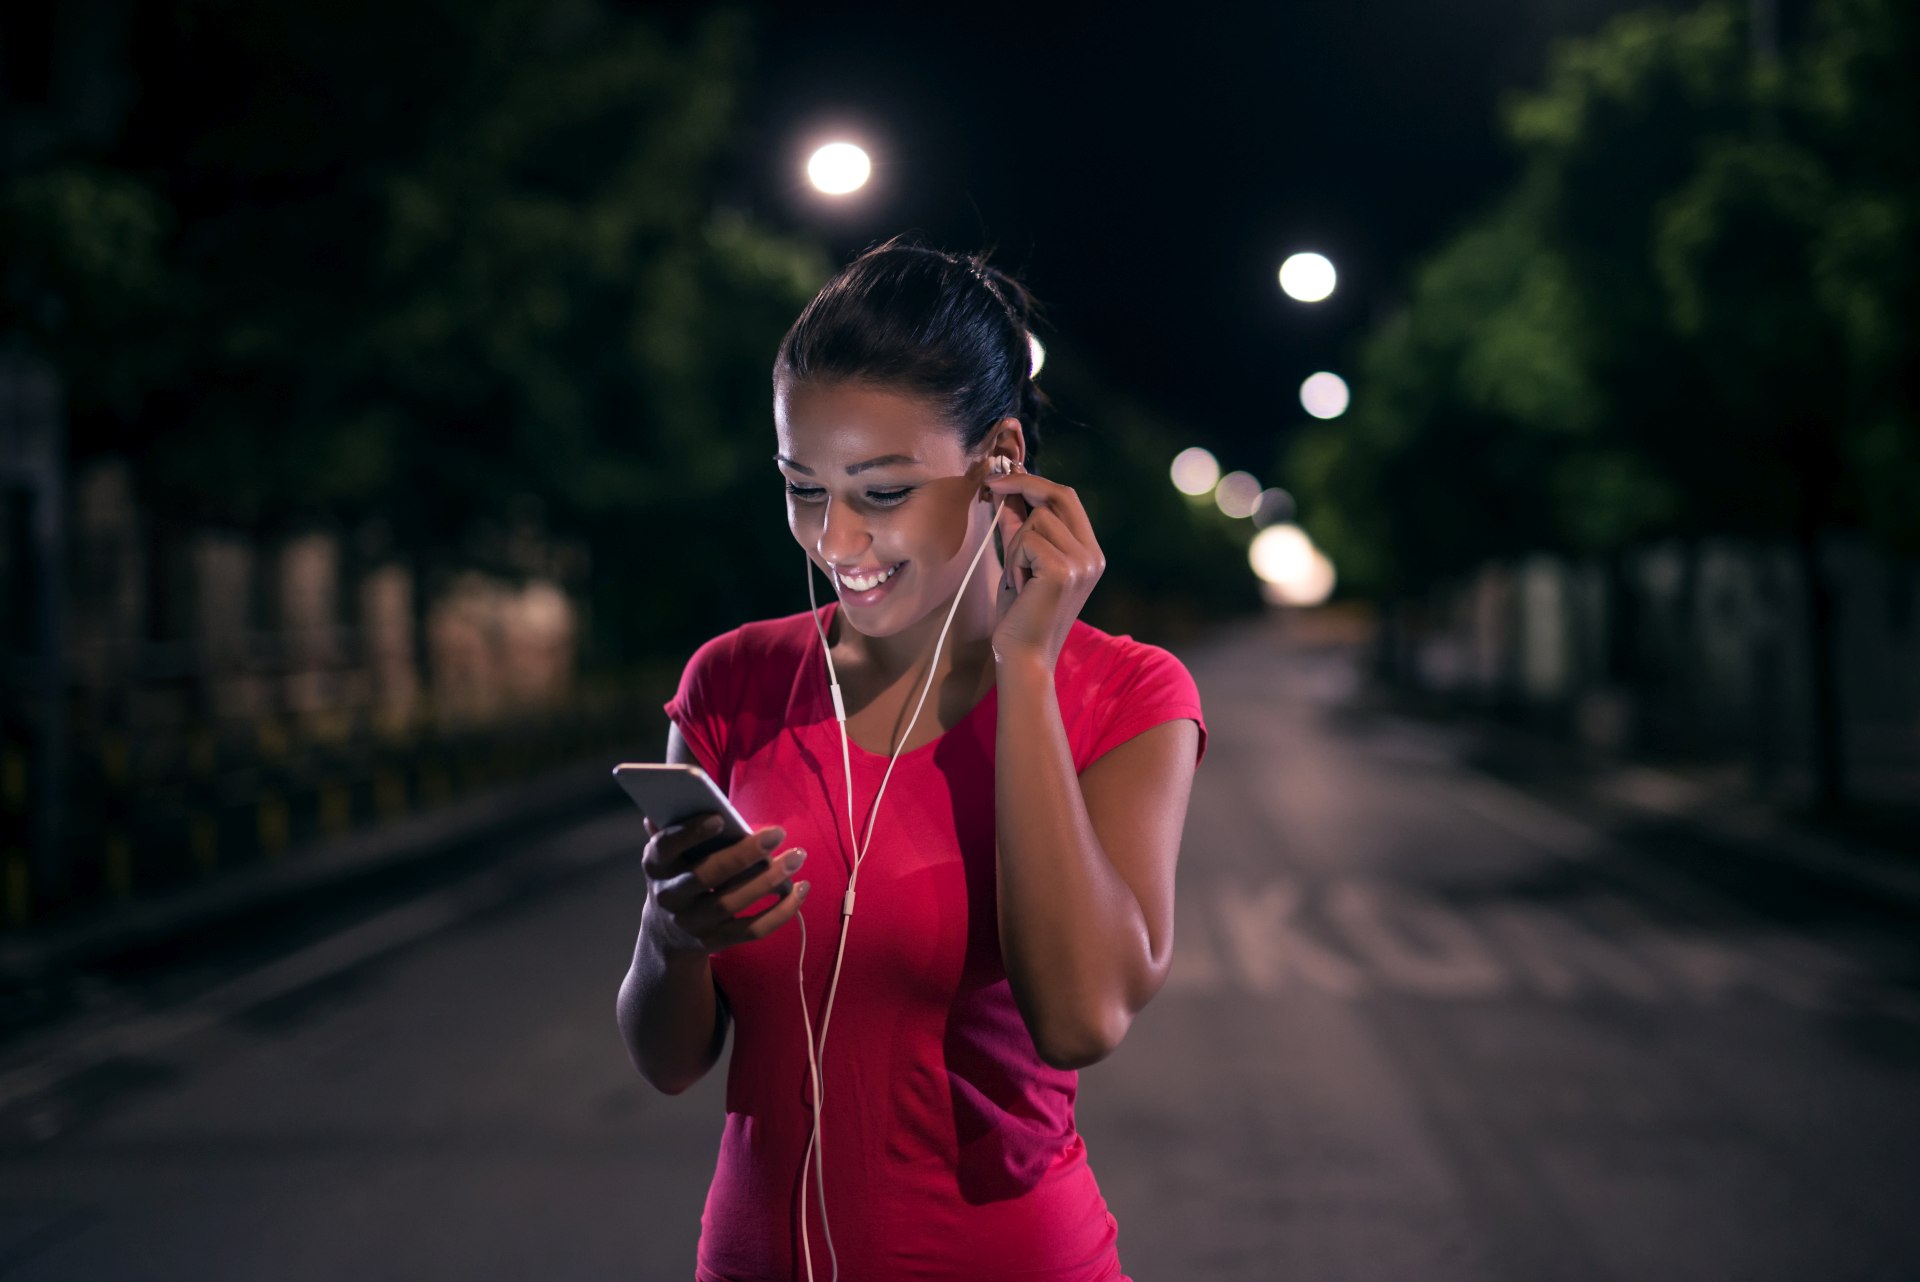 Beautiful young woman jogging at night smiling while looking at her phone